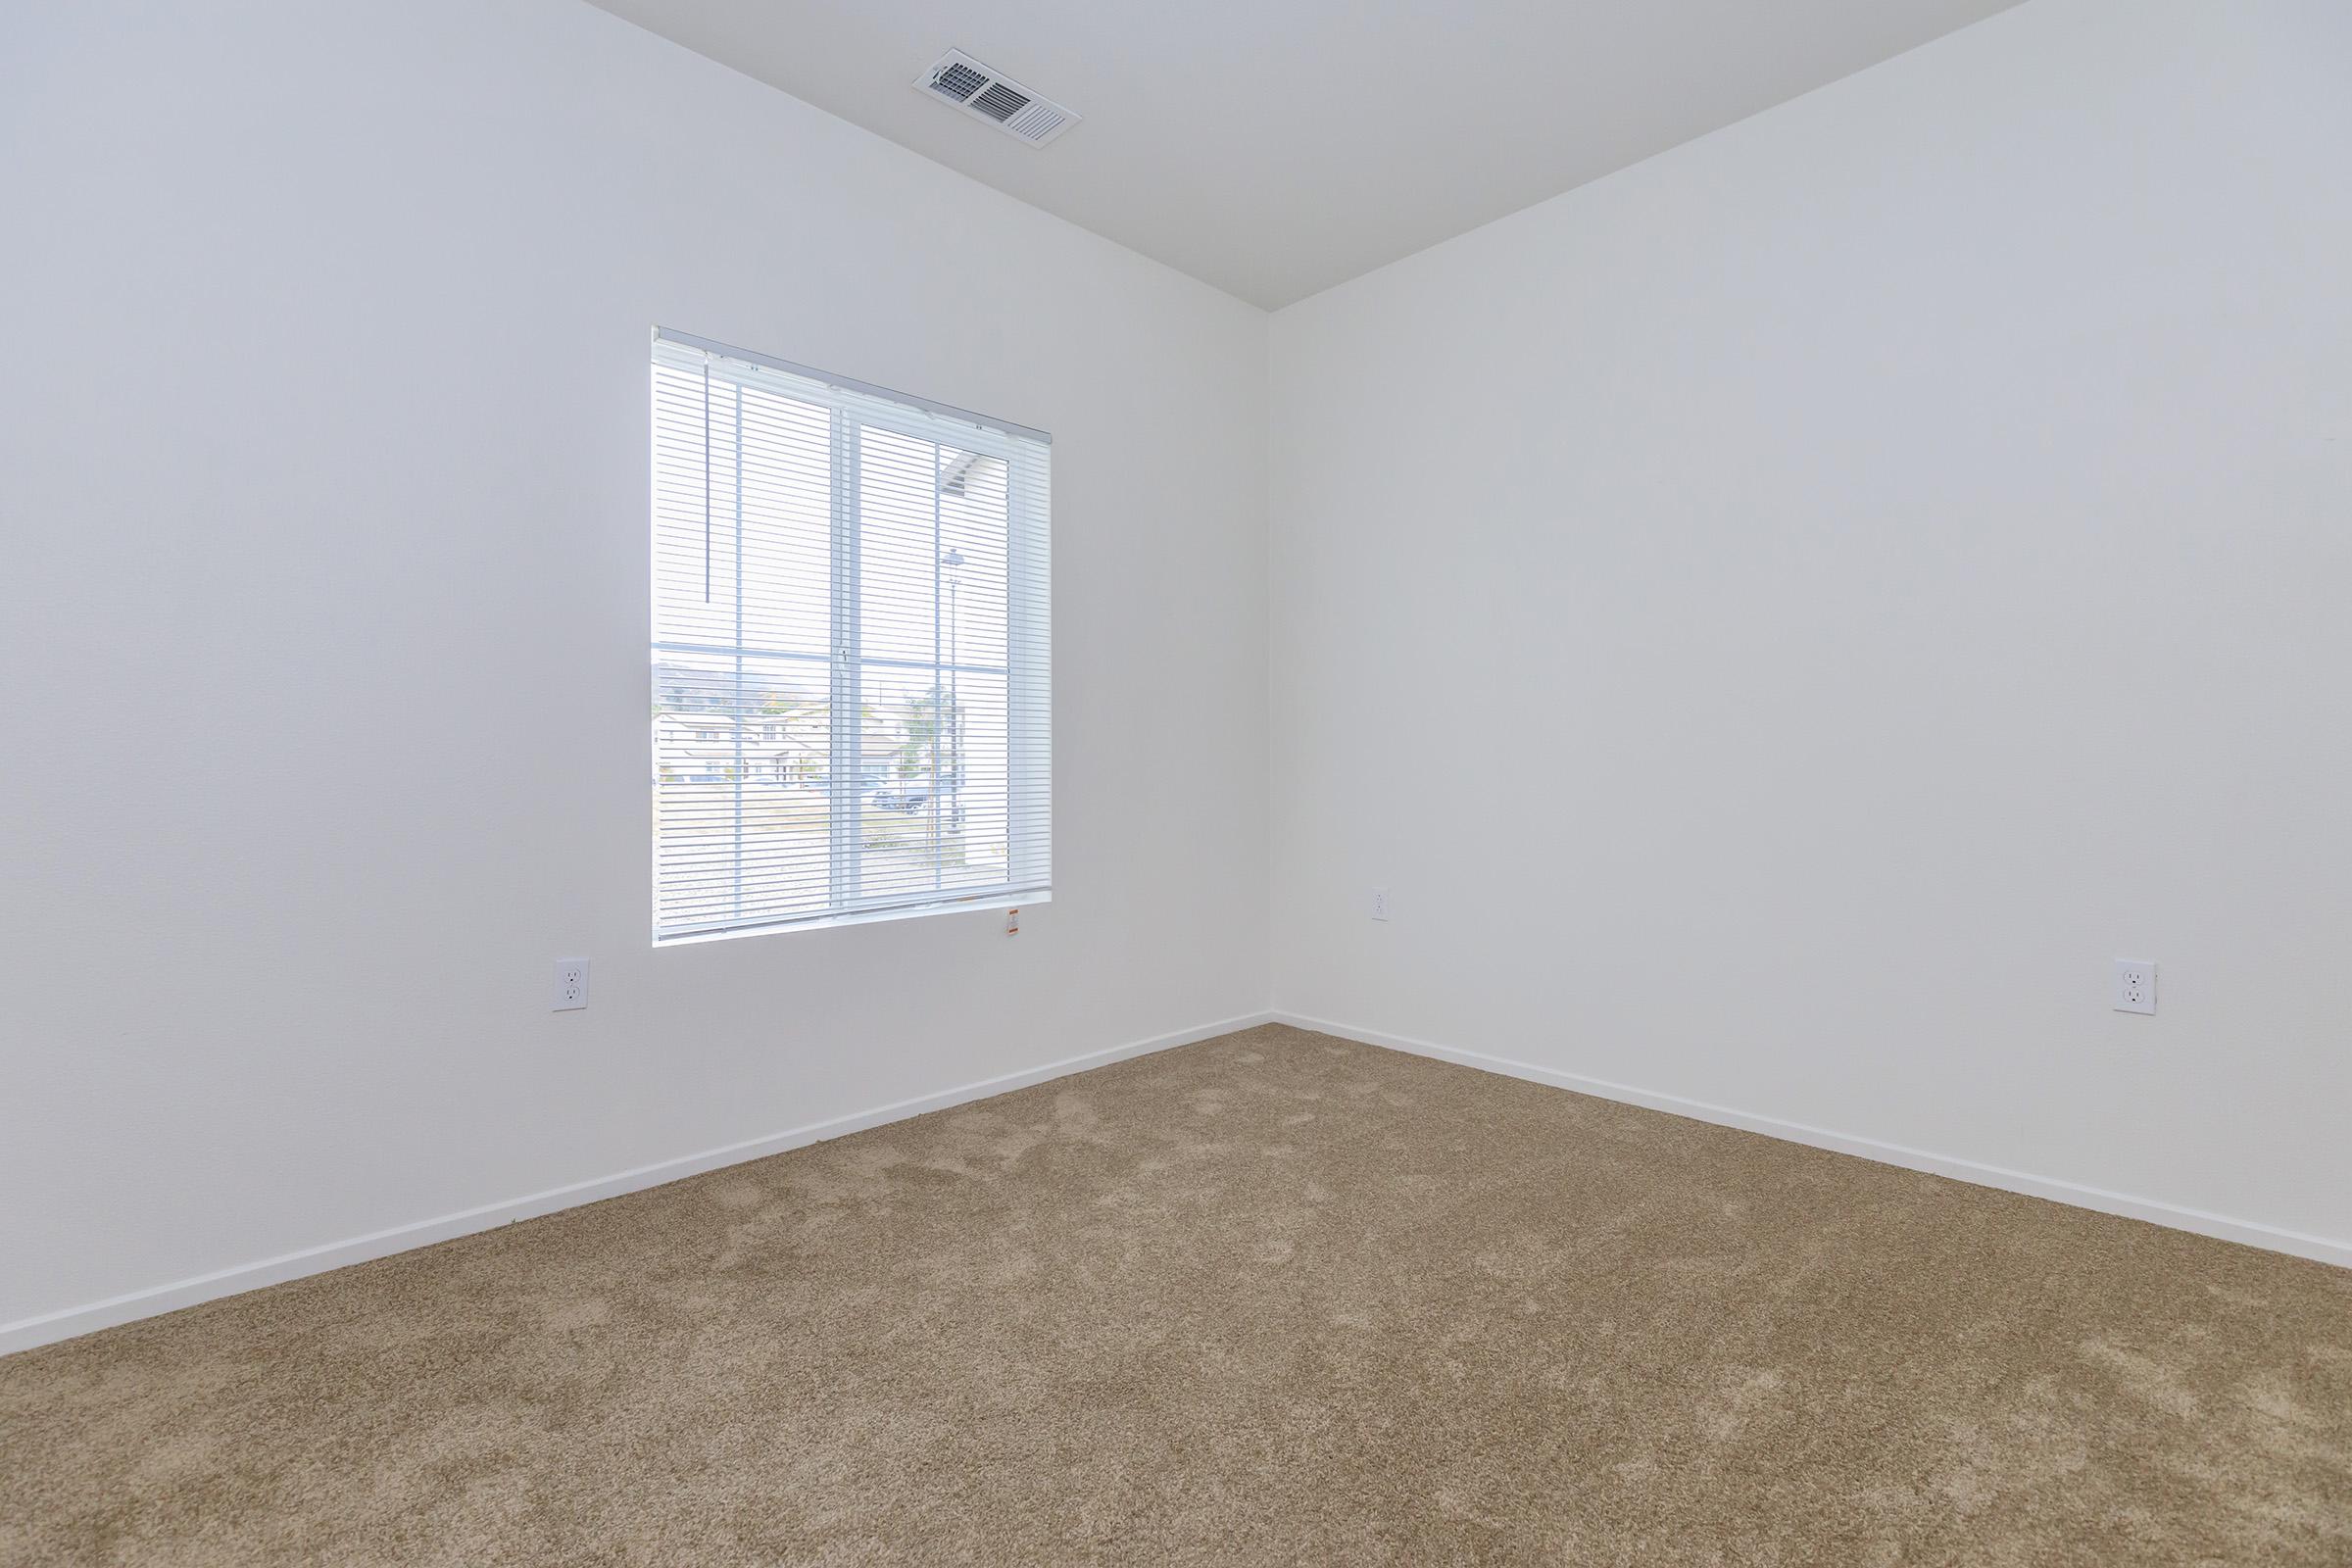 Vacant carpeted bedroom